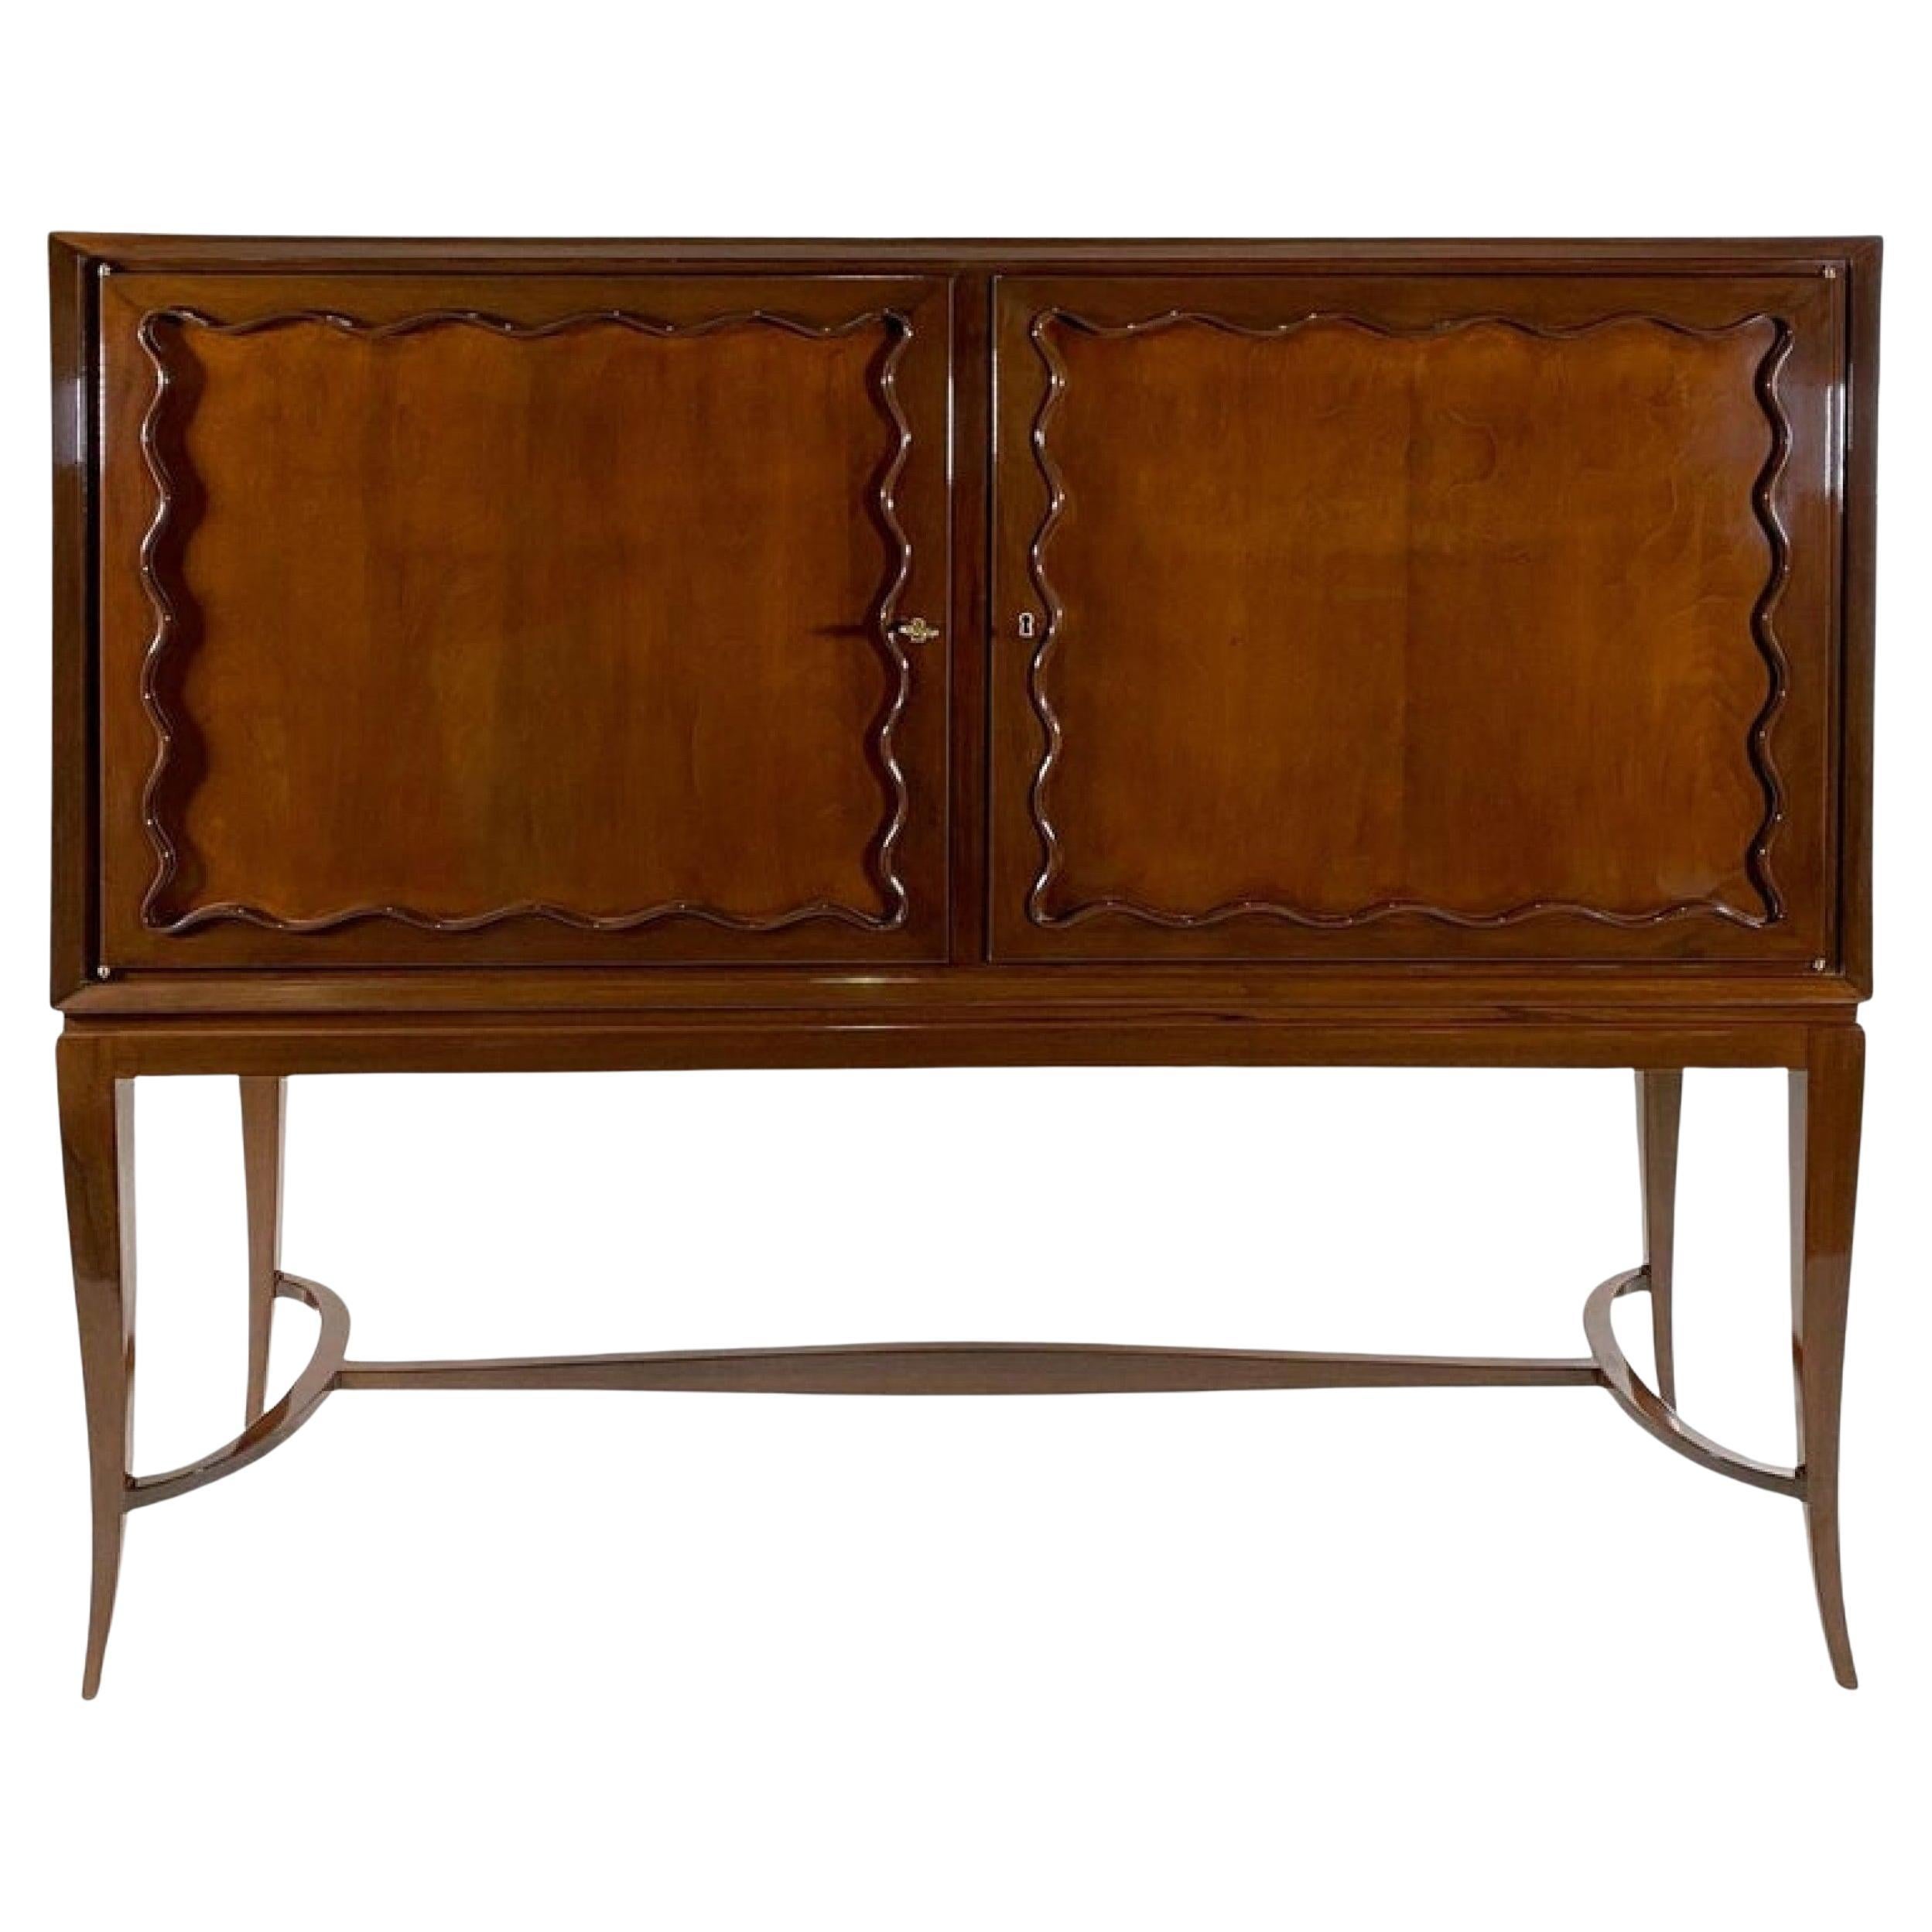 French Modern Mahogany 2 Door Bar Cabinet, Jean Royere Attr. For Sale